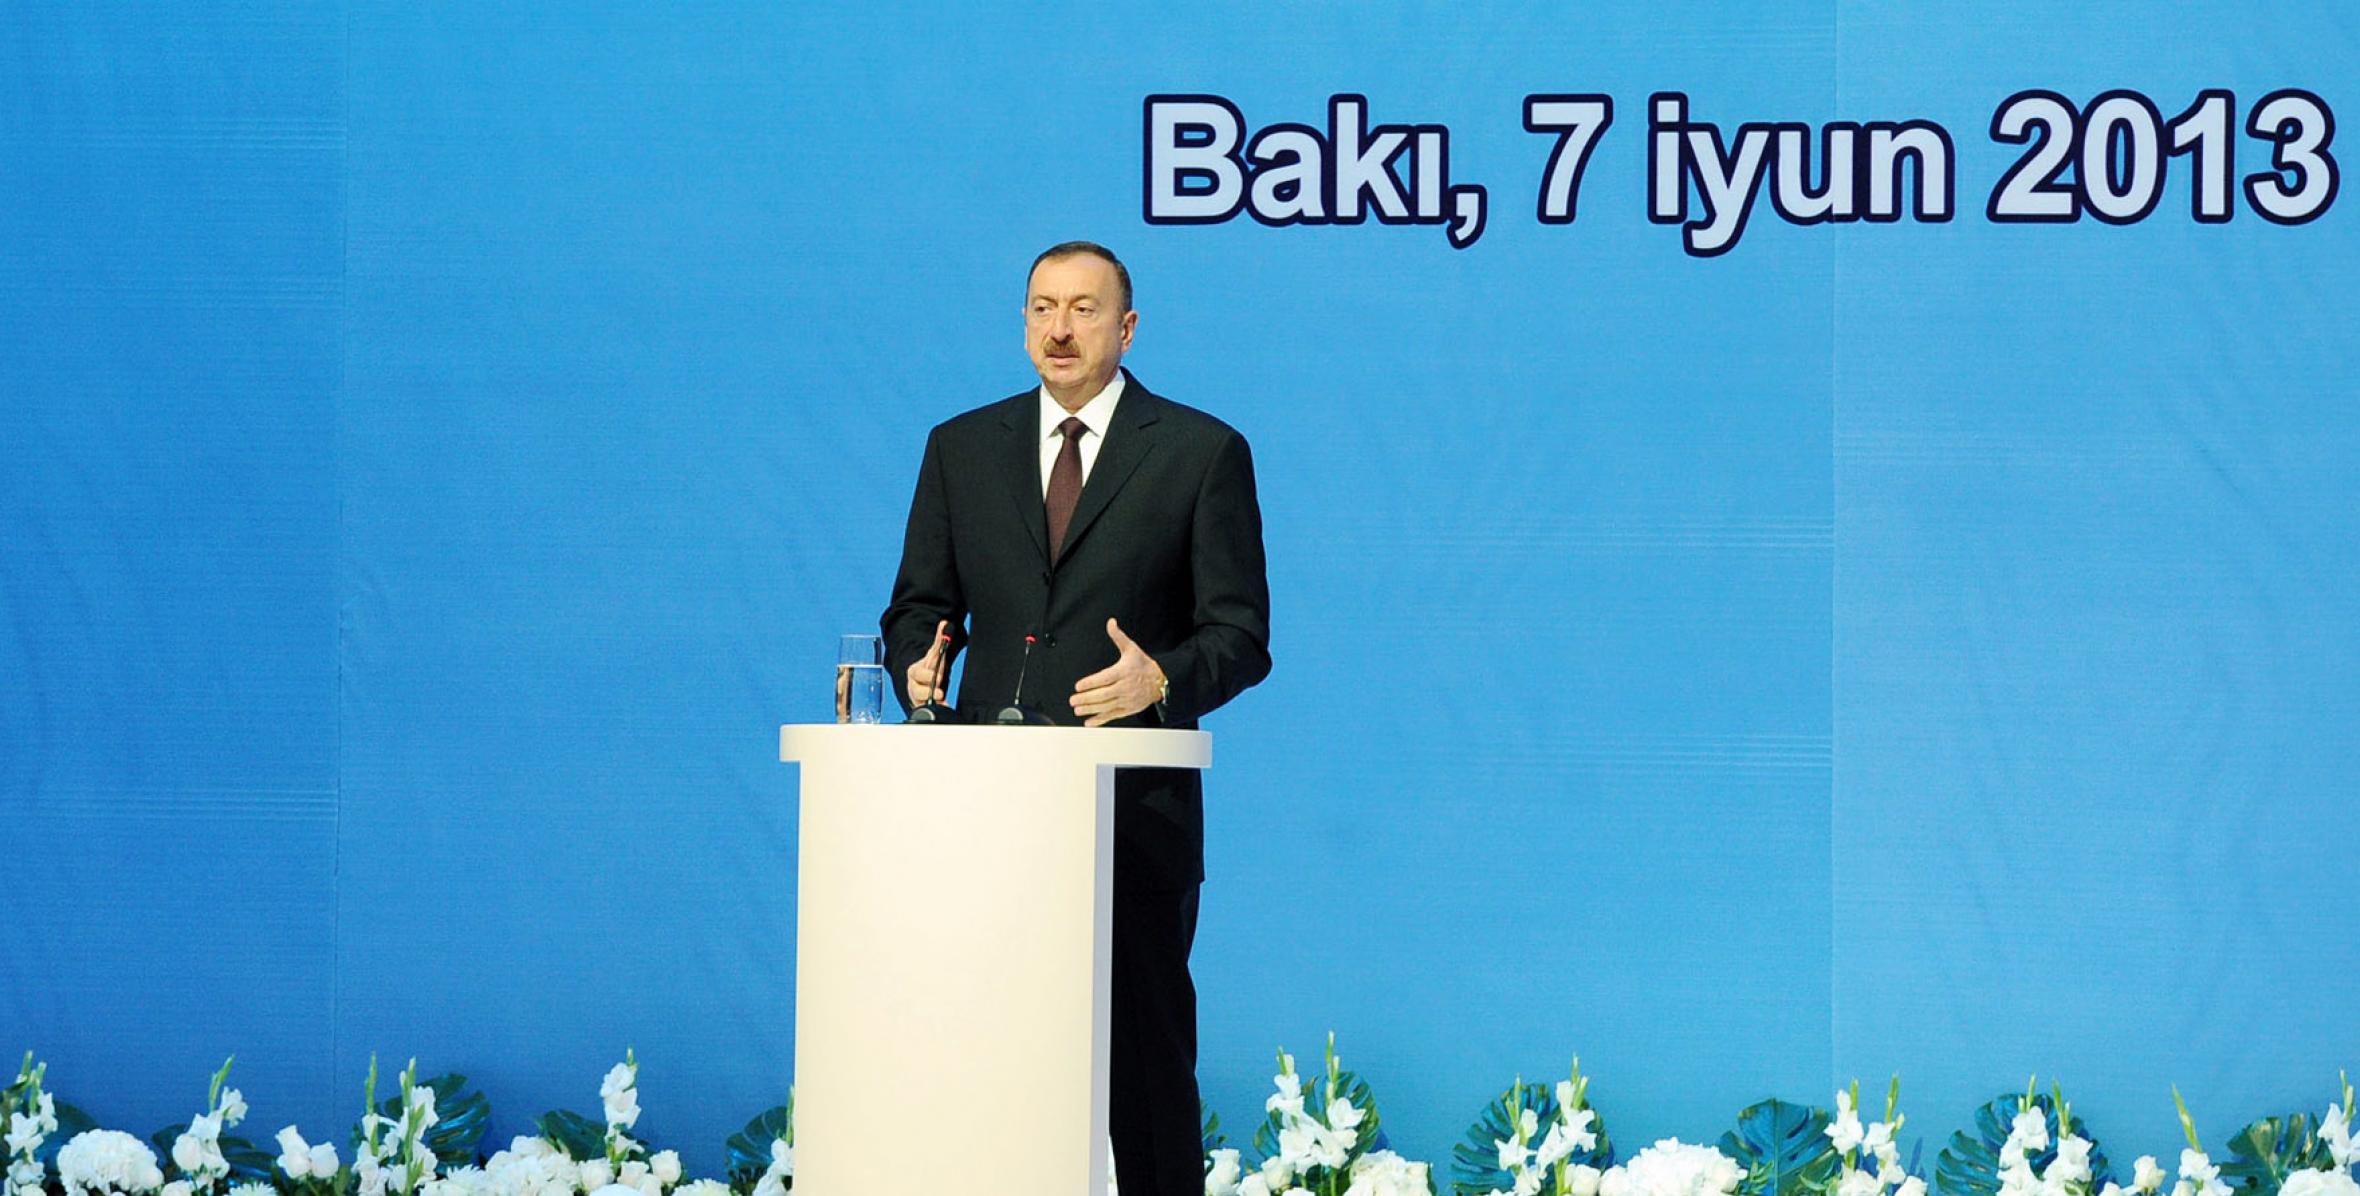 Speech by Ilham Aliyev at the Fifth Congress of the "Yeni Azerbaijan Party"